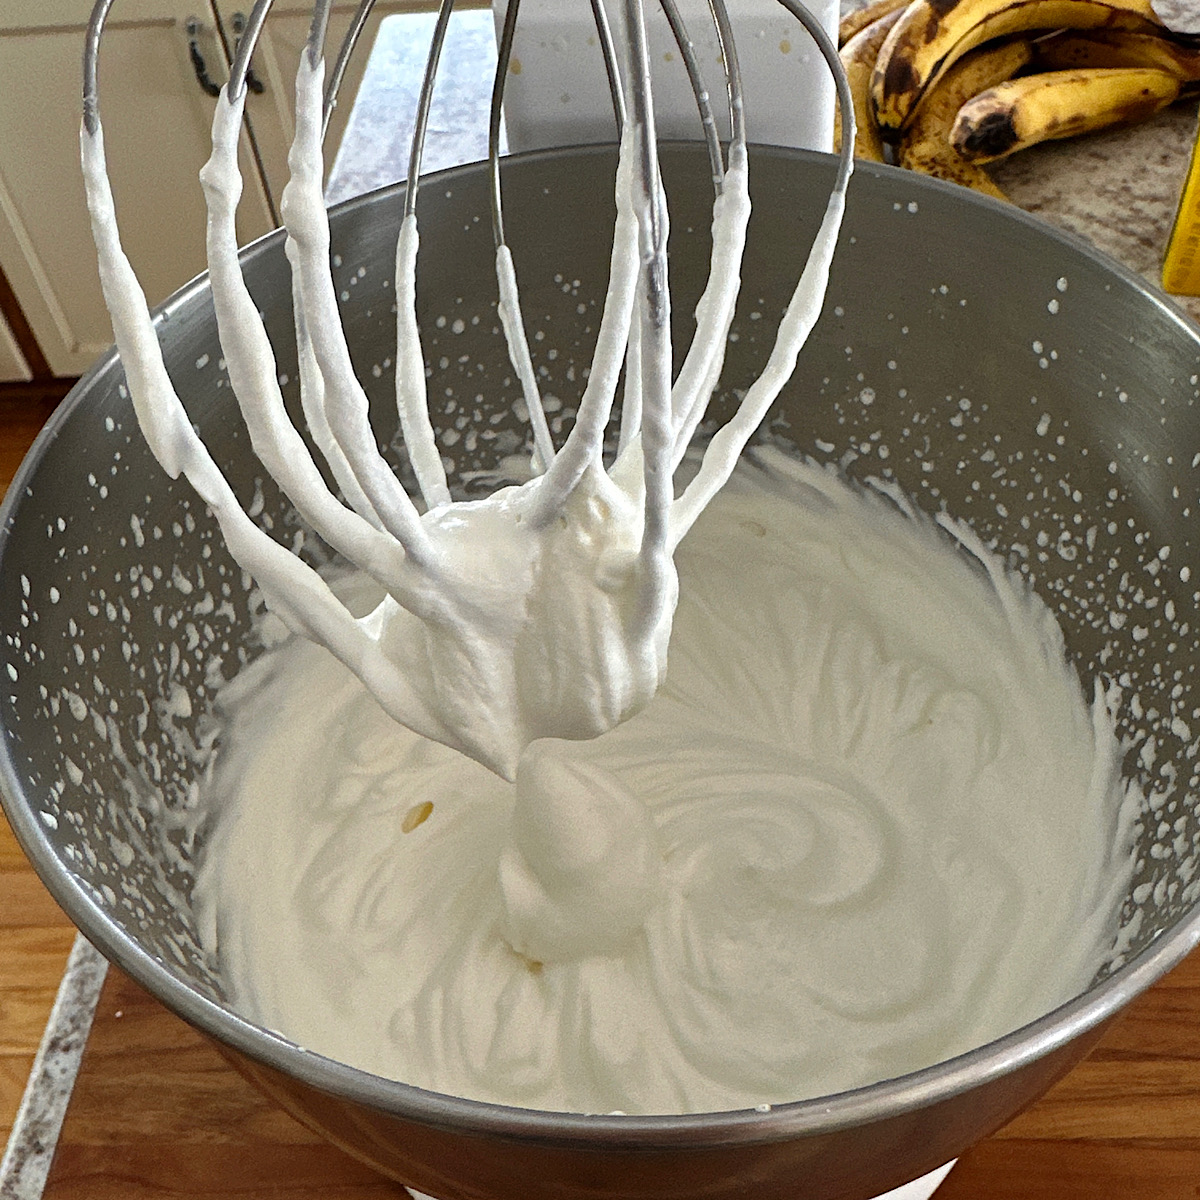 Stand mixer with whipped cream beat into soft peaks.